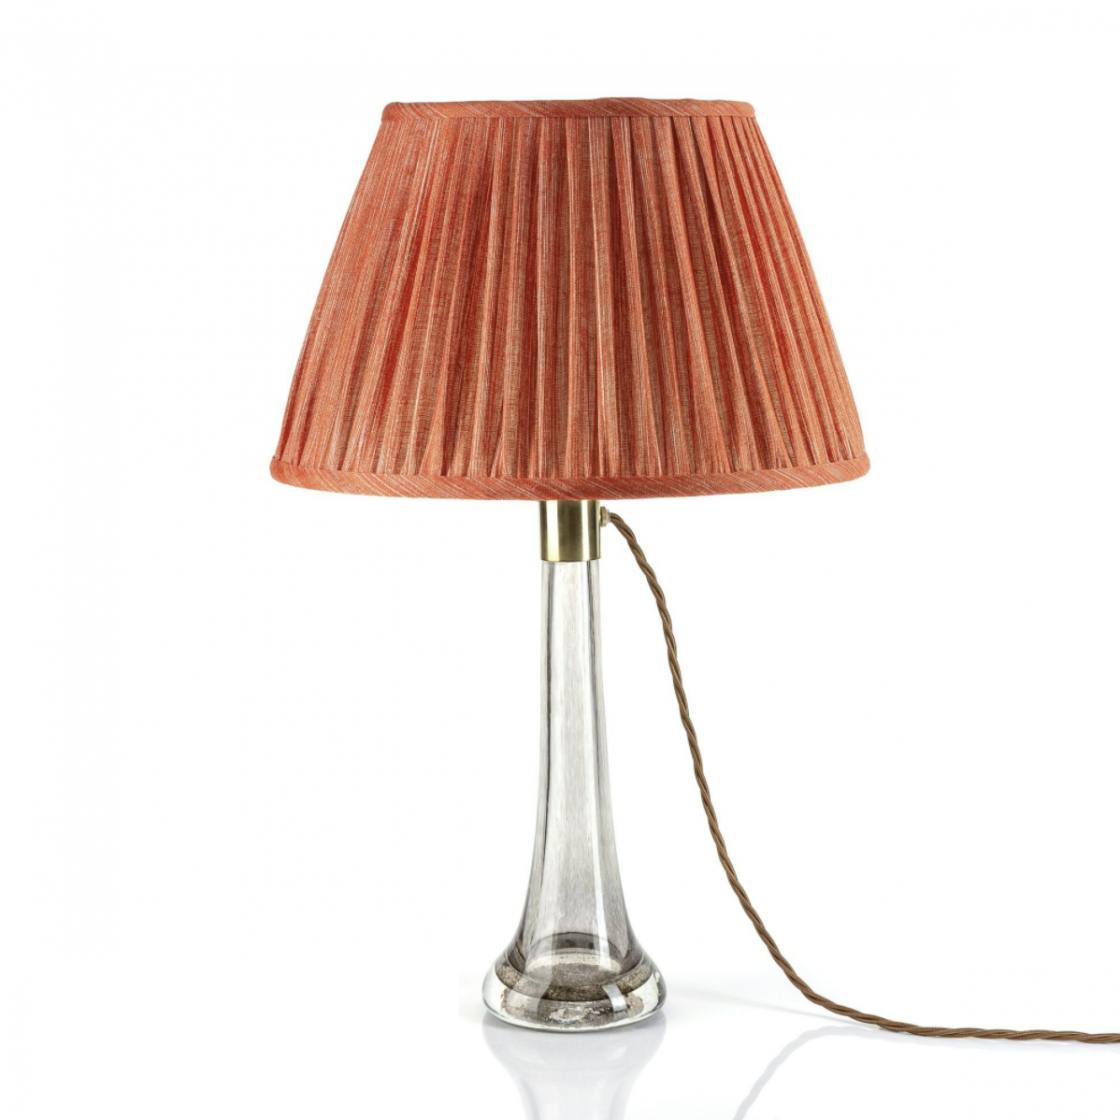 7 Pleated Lampshades To Give Your Home, Pleated Lamp Shades For Table Lamps Uk